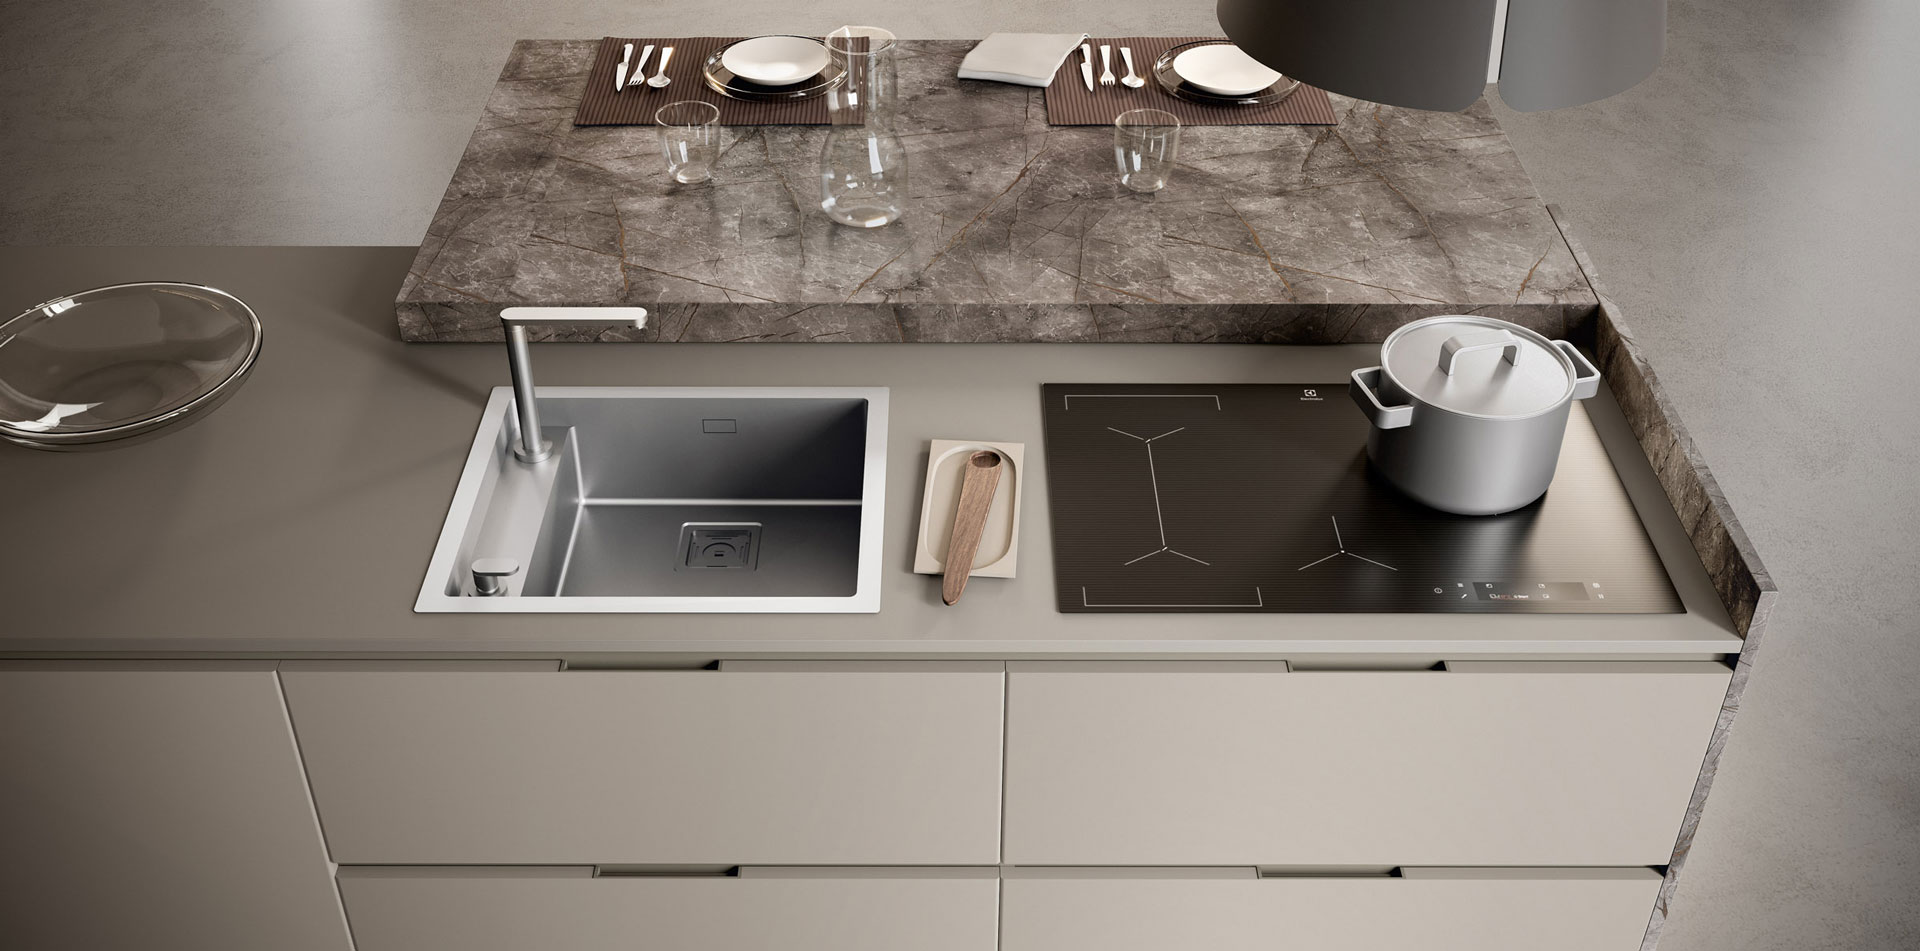 Methods of Installing a Kitchen Sink: A Detailed Overview